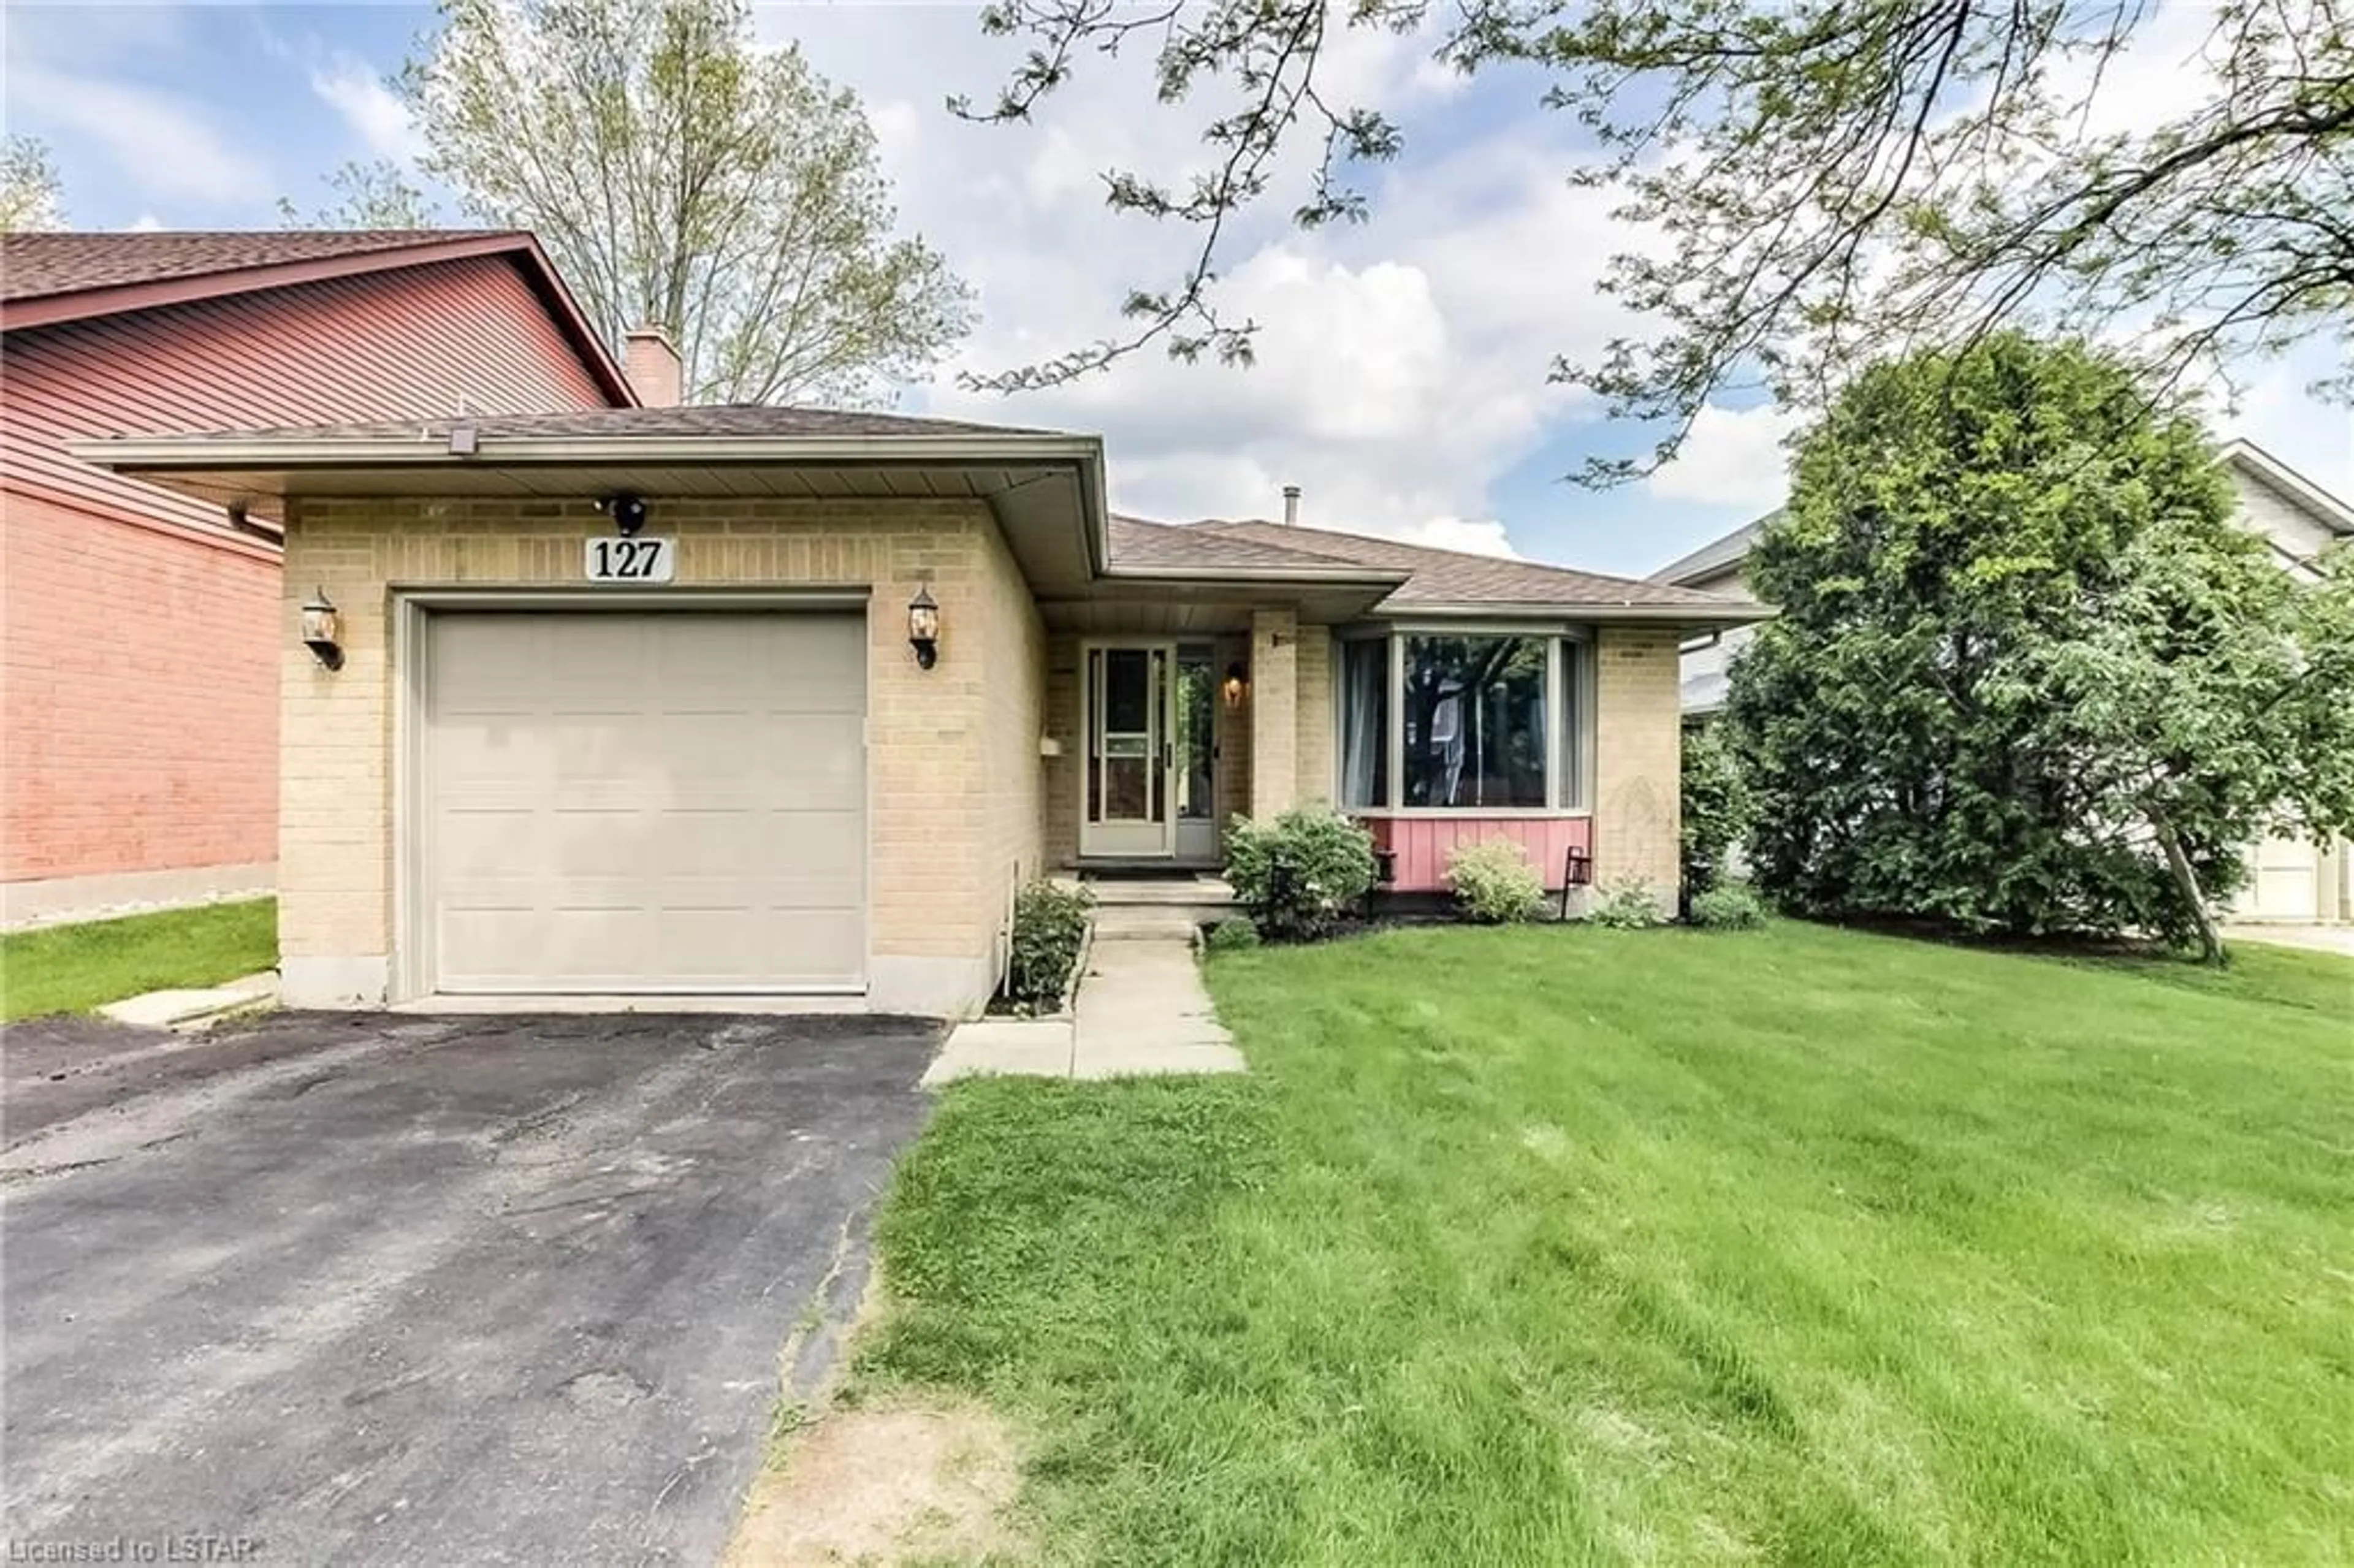 Frontside or backside of a home for 127 Golfview Rd, London Ontario N6C 5V3